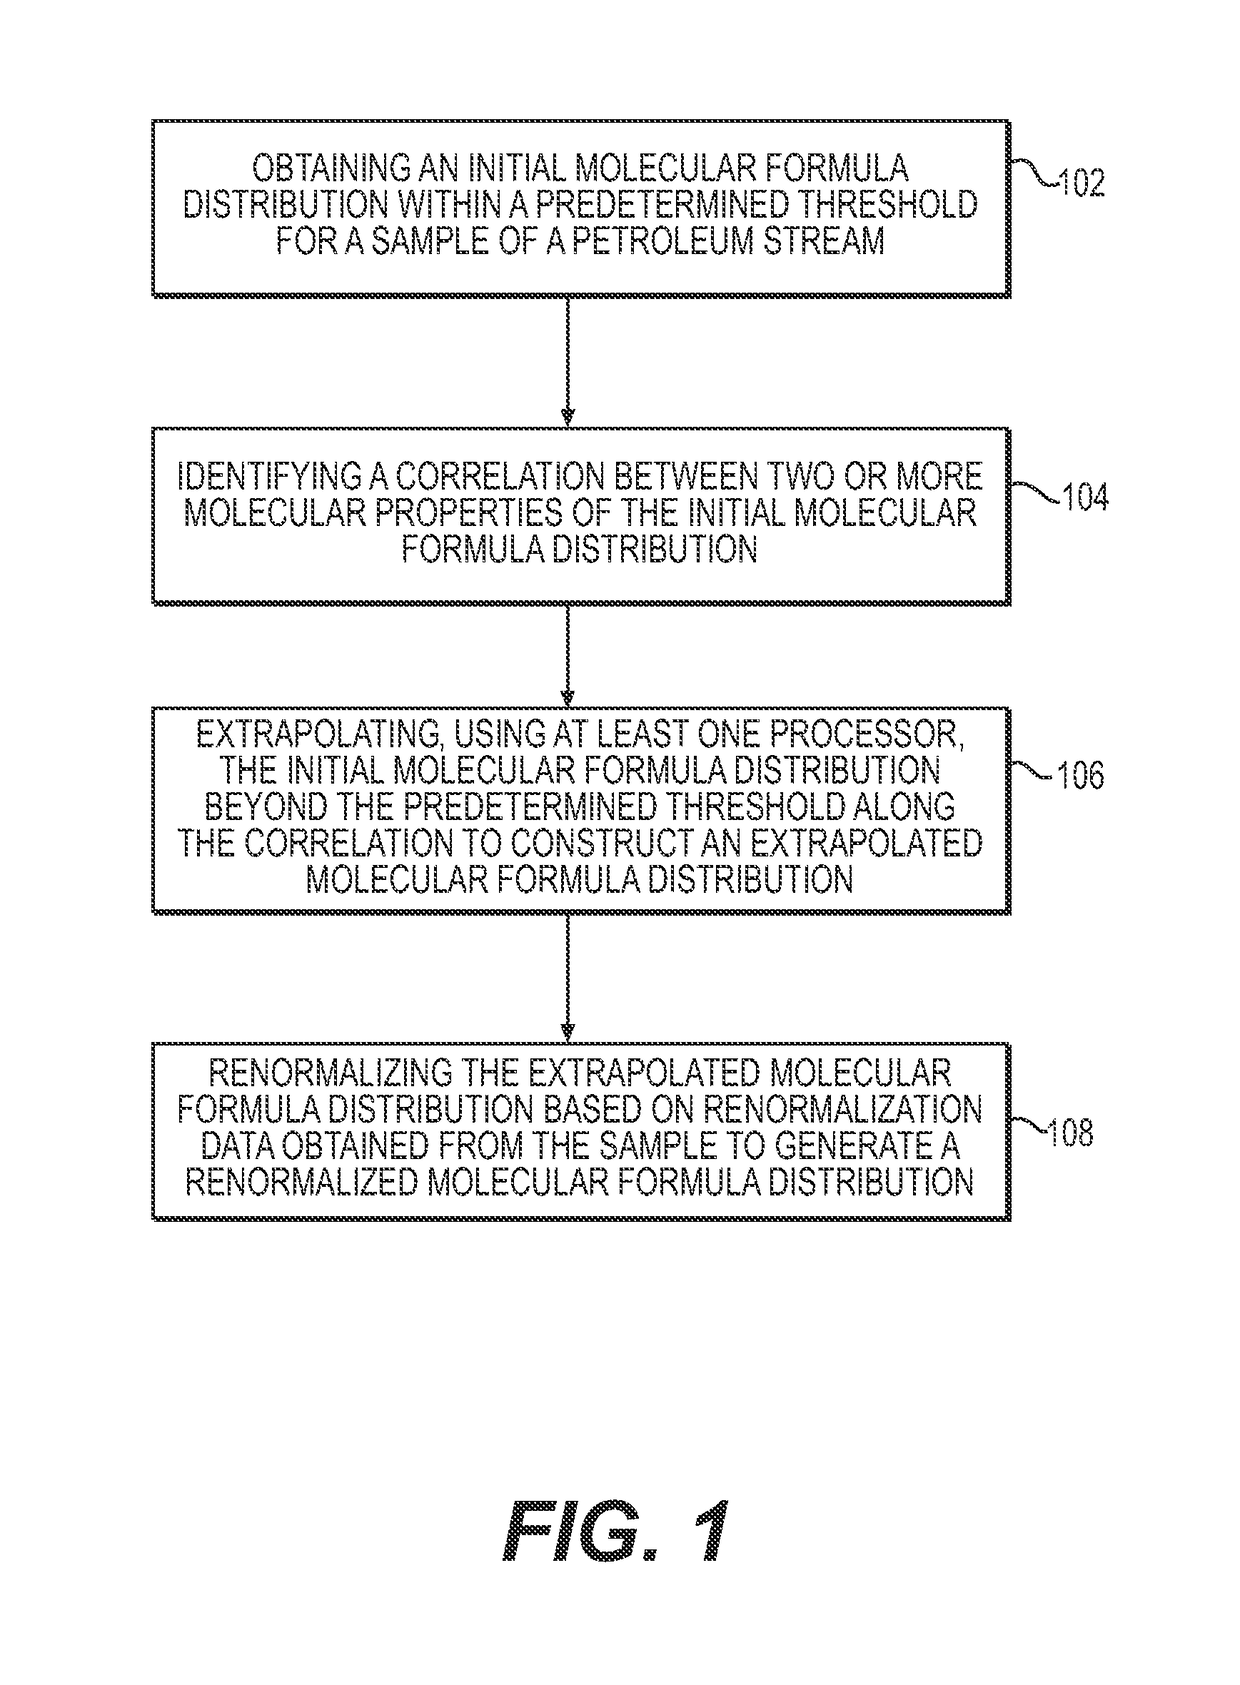 System and method to generate molecular formula distributions beyond a predetermined threshold for a petroleum stream